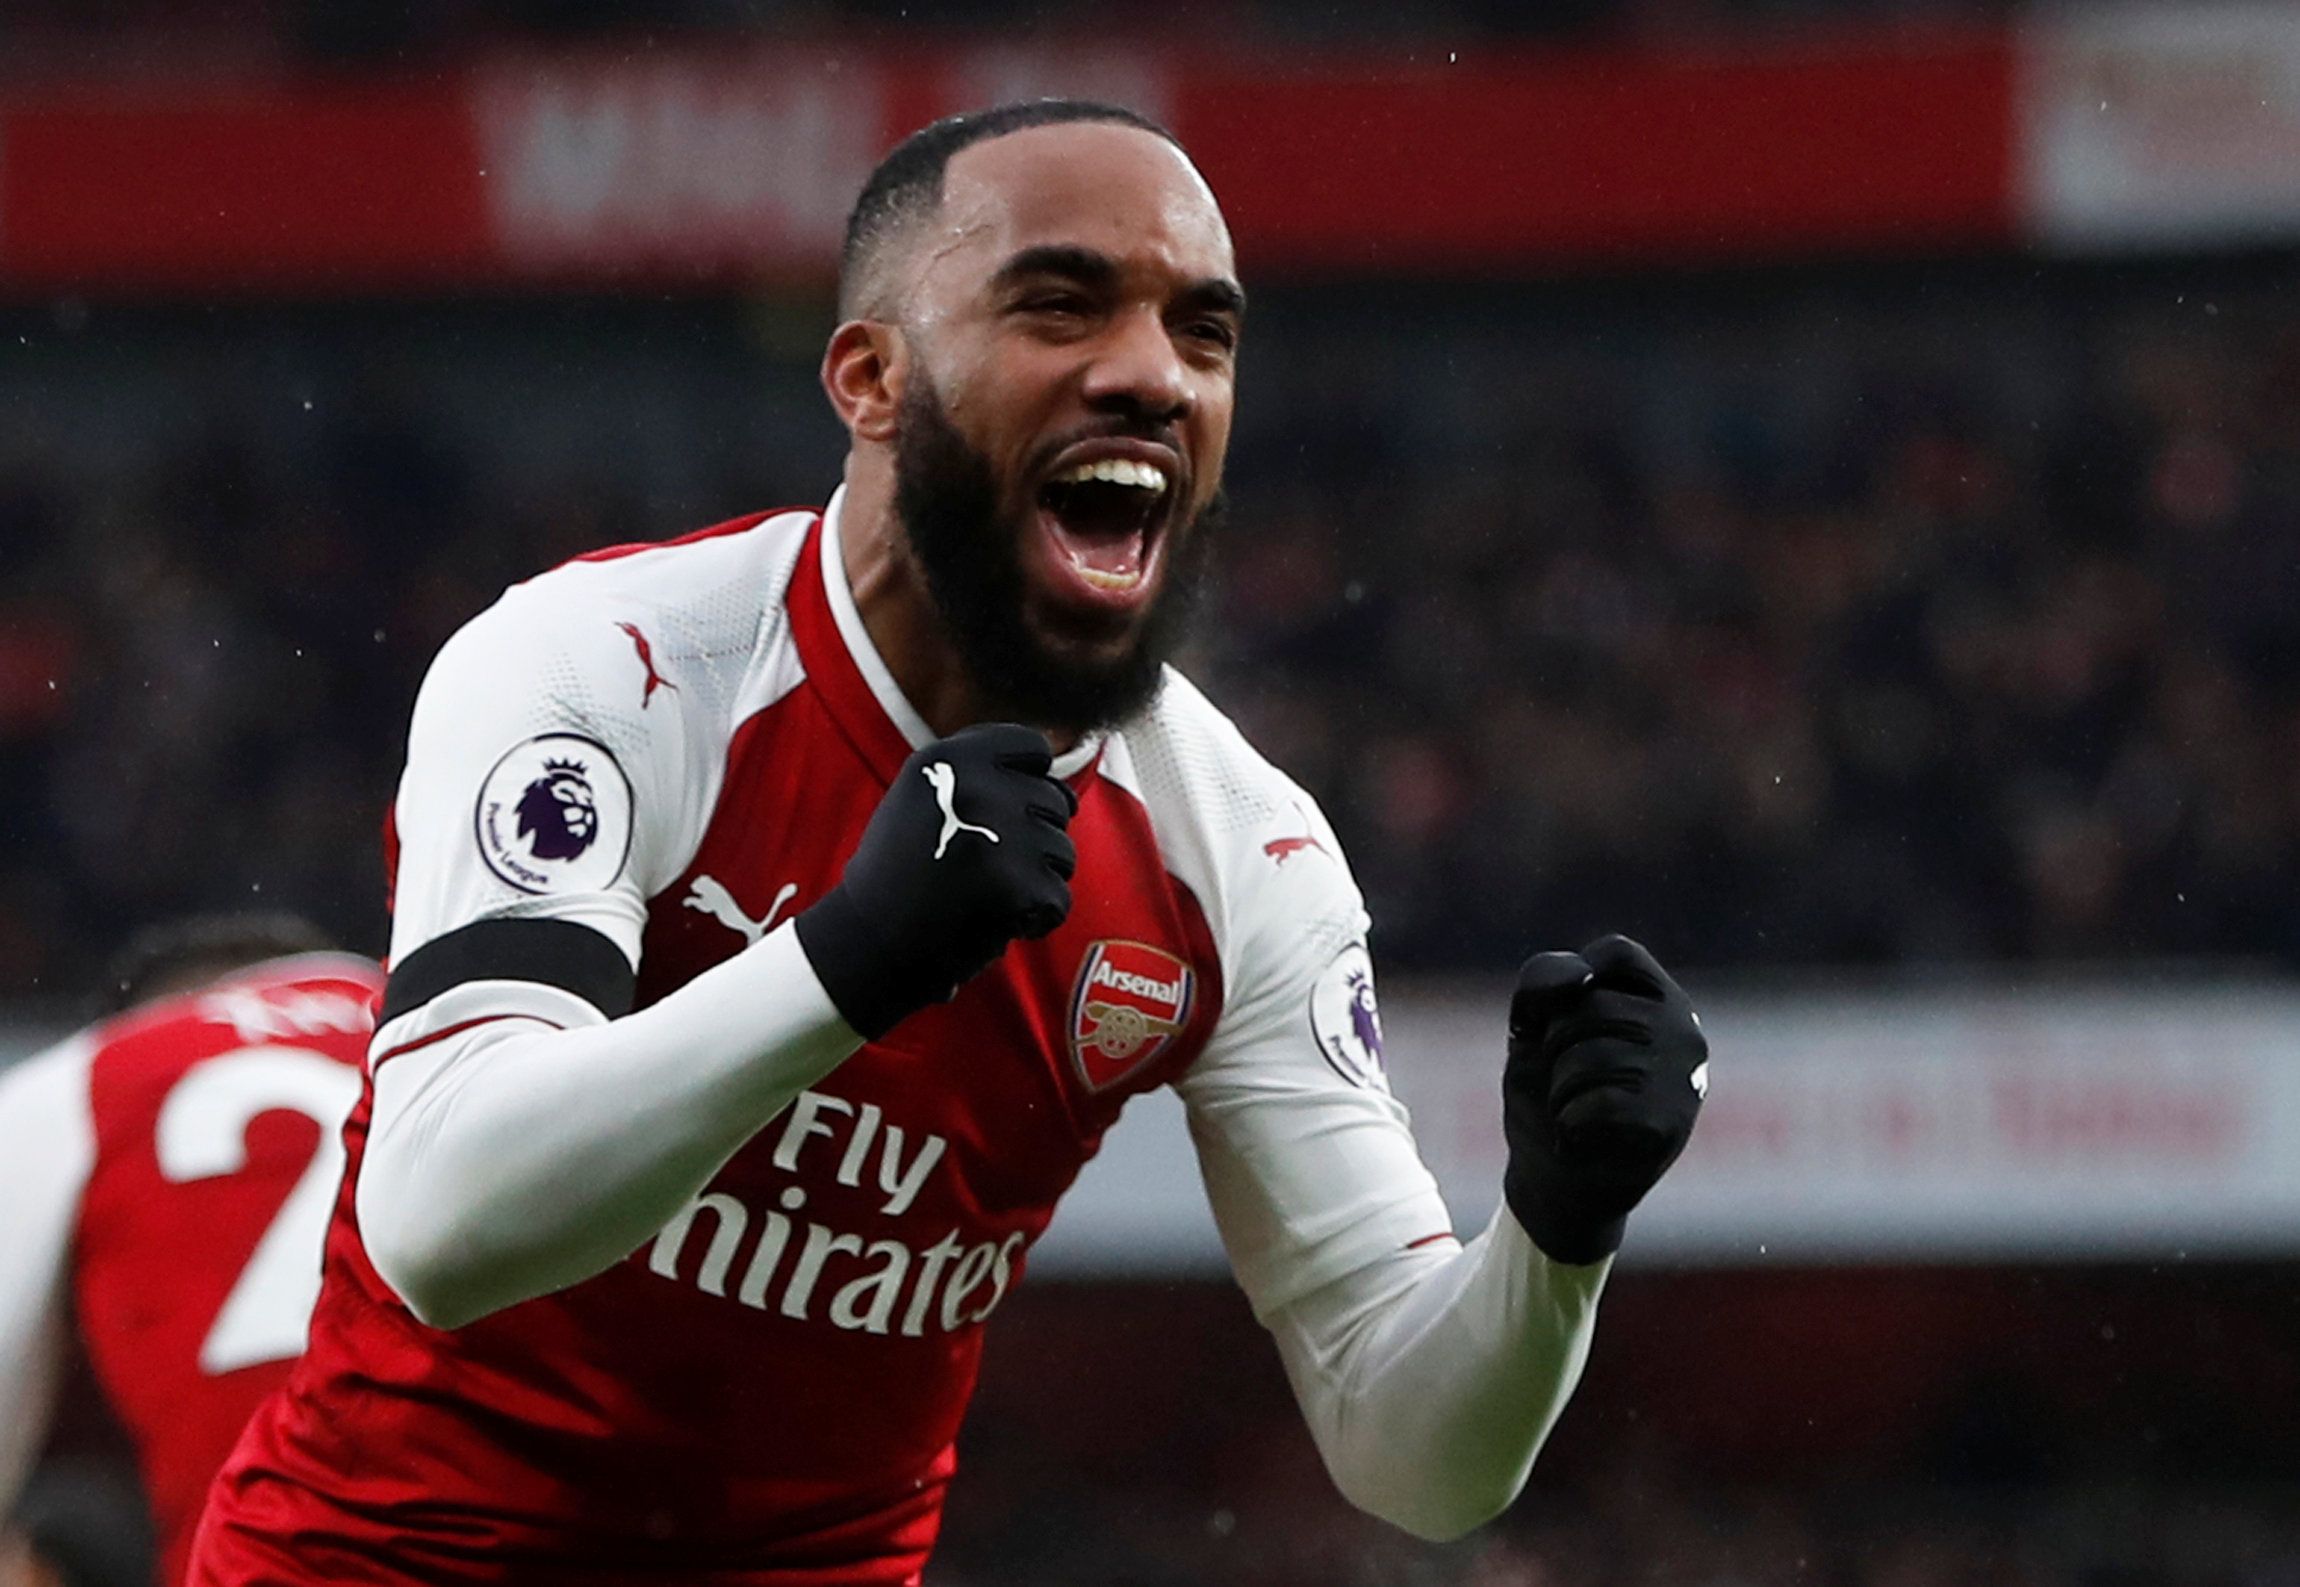 Soccer Football - Premier League - Arsenal vs Crystal Palace - Emirates Stadium, London, Britain - January 20, 2018   Arsenal's Alexandre Lacazette celebrates scoring their fourth goal             Action Images via Reuters/Paul Childs    EDITORIAL USE ONLY. No use with unauthorized audio, video, data, fixture lists, club/league logos or "live" services. Online in-match use limited to 75 images, no video emulation. No use in betting, games or single club/league/player publications.  Please contac